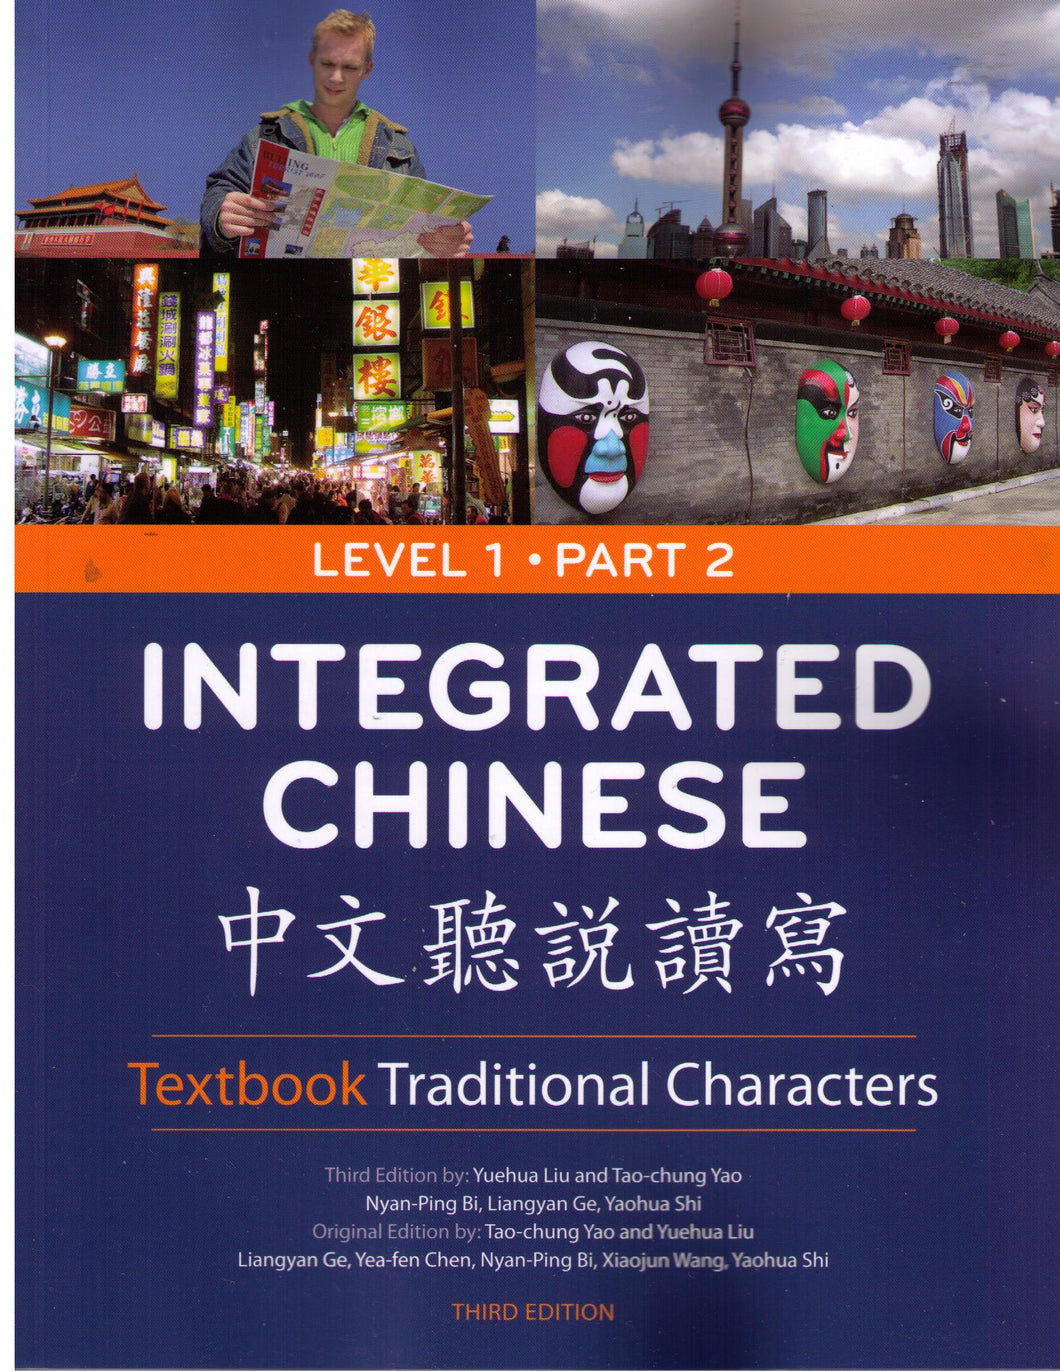 Integrated Chinese Level 1 Part 2-3rd Ed. Textbook-Traditional-Pbk中文聽說讀寫